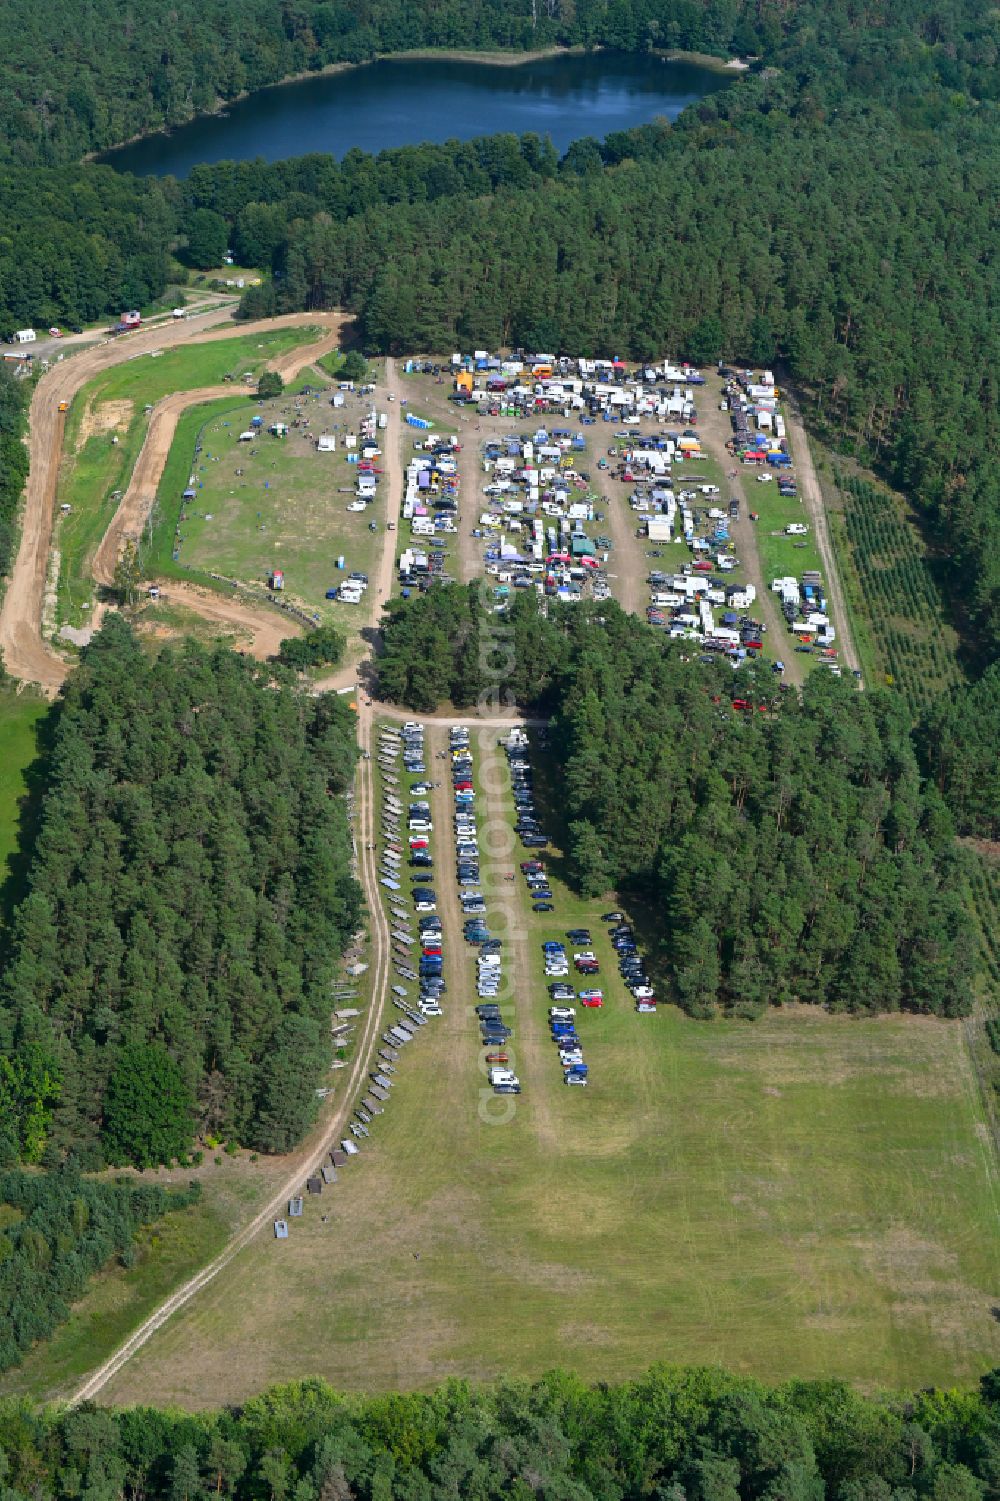 Biesenthal from above - Motocross race track MC Klosterfelde e.V. in Biesenthal in the state Brandenburg, Germany